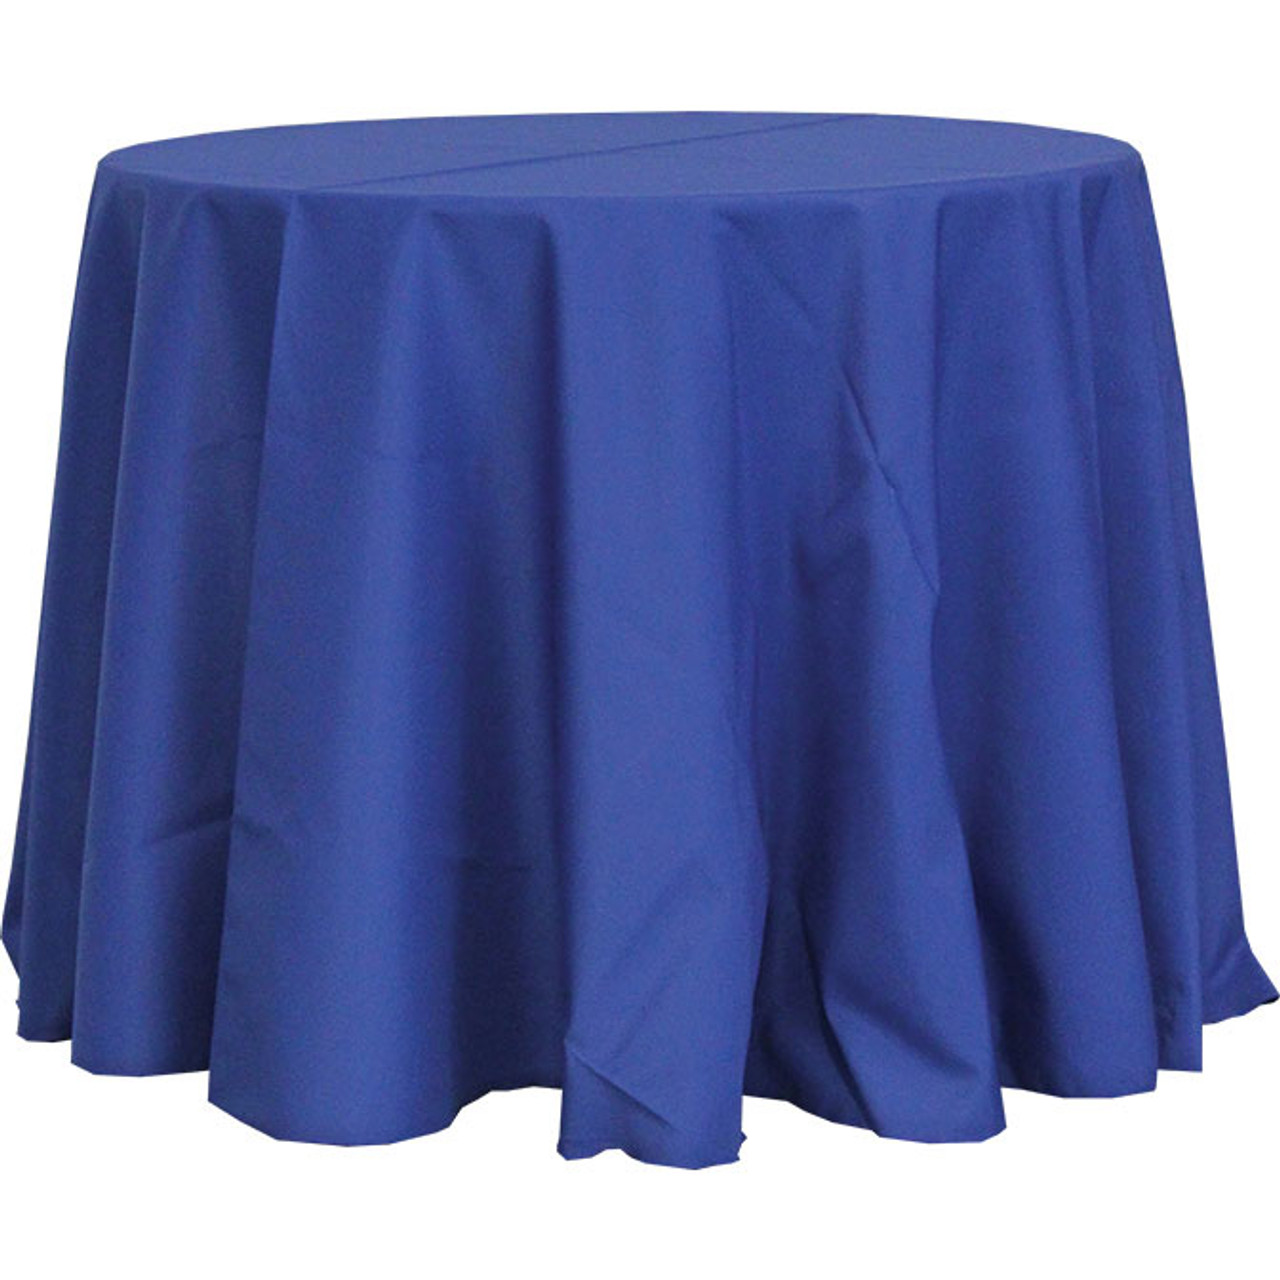 96" Round Polyester Tableloth